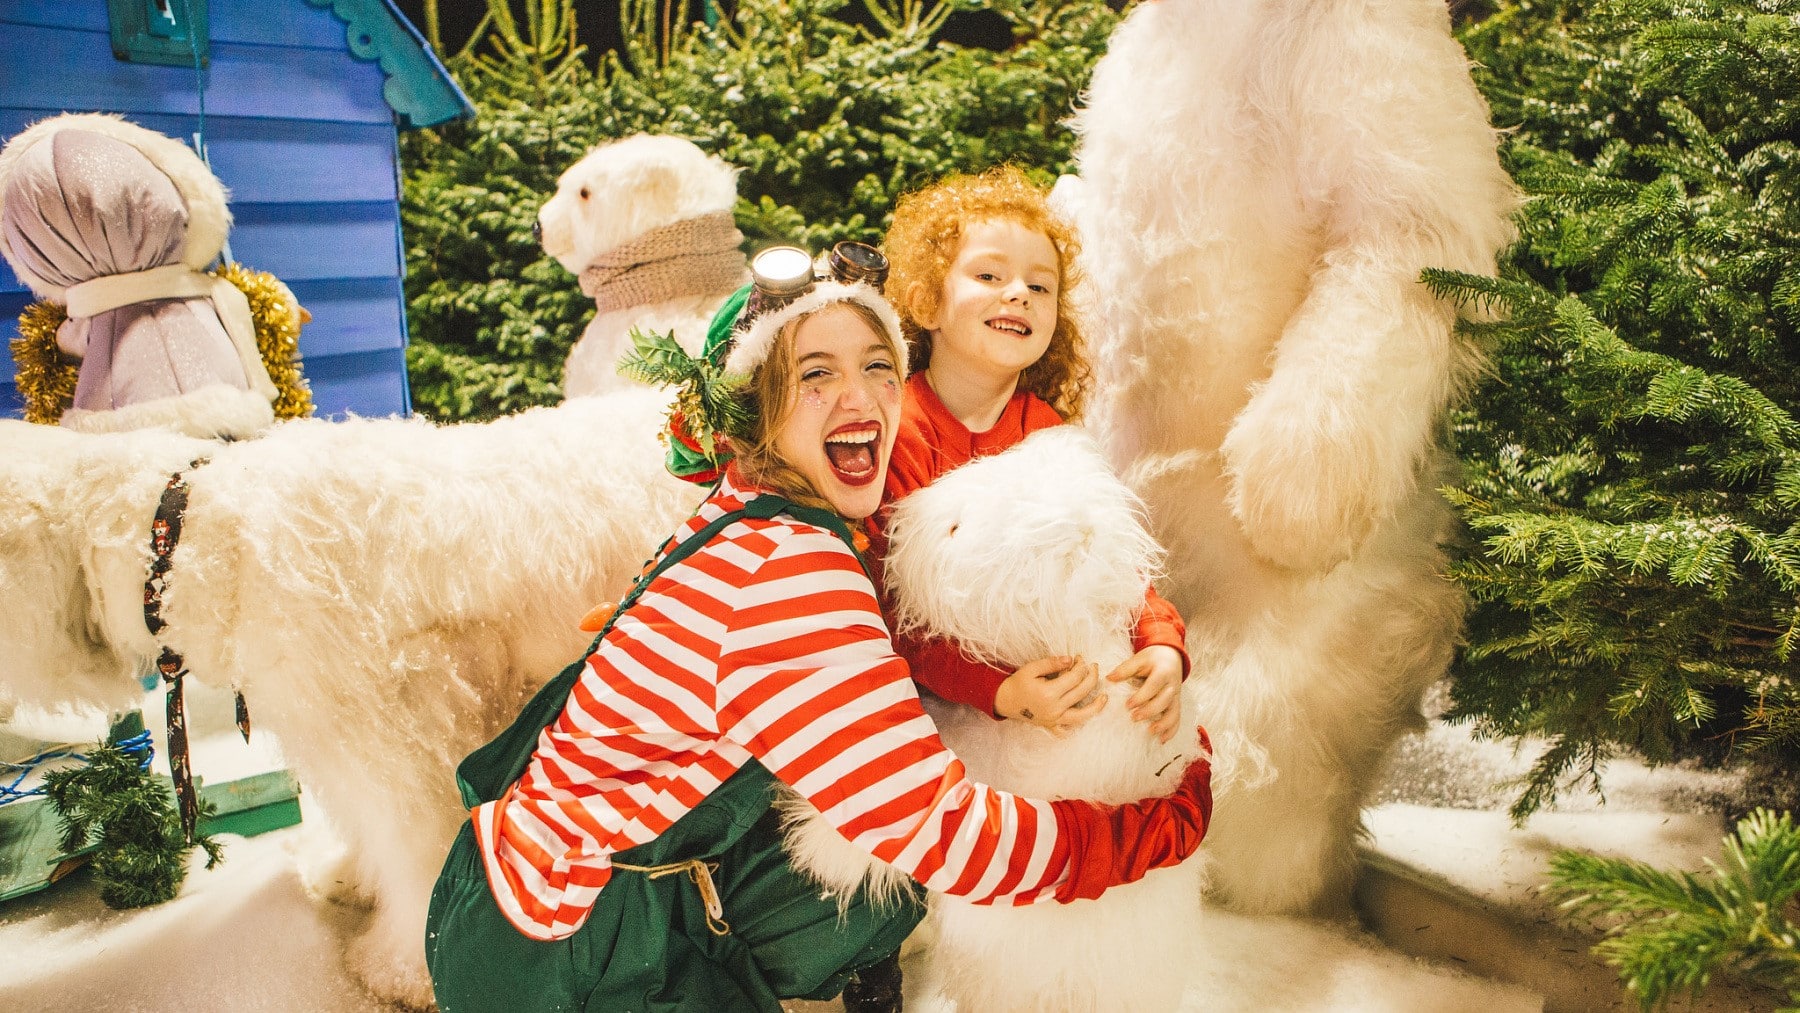 A Christmas elf with a young girl surrounded by Chrtimas trees and polar bears at Winter Funland